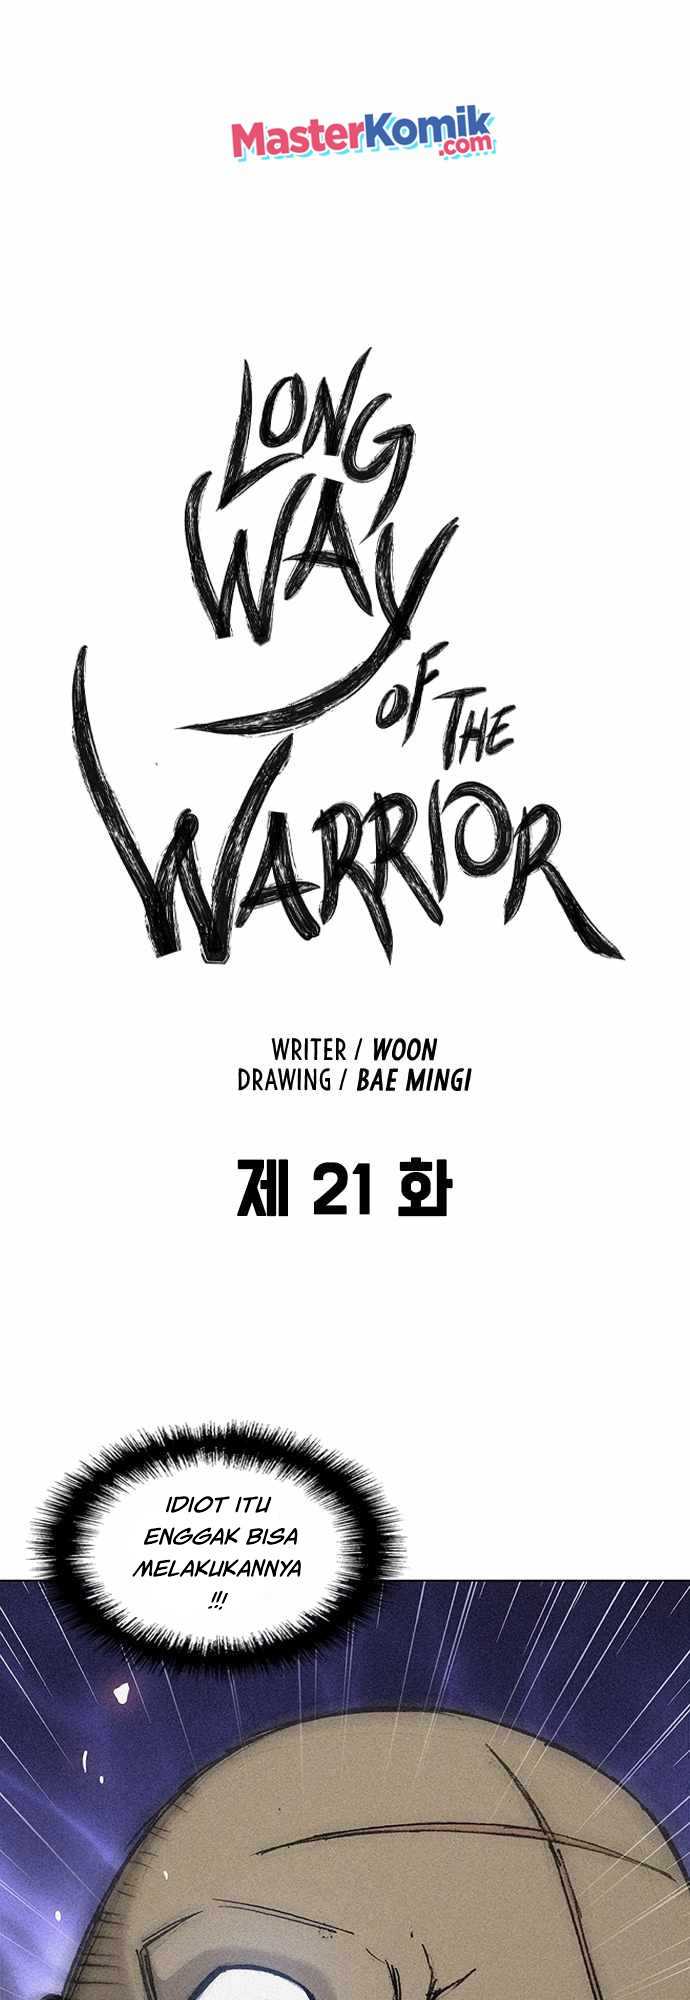 The Long Way Of The Warrior Chapter 21